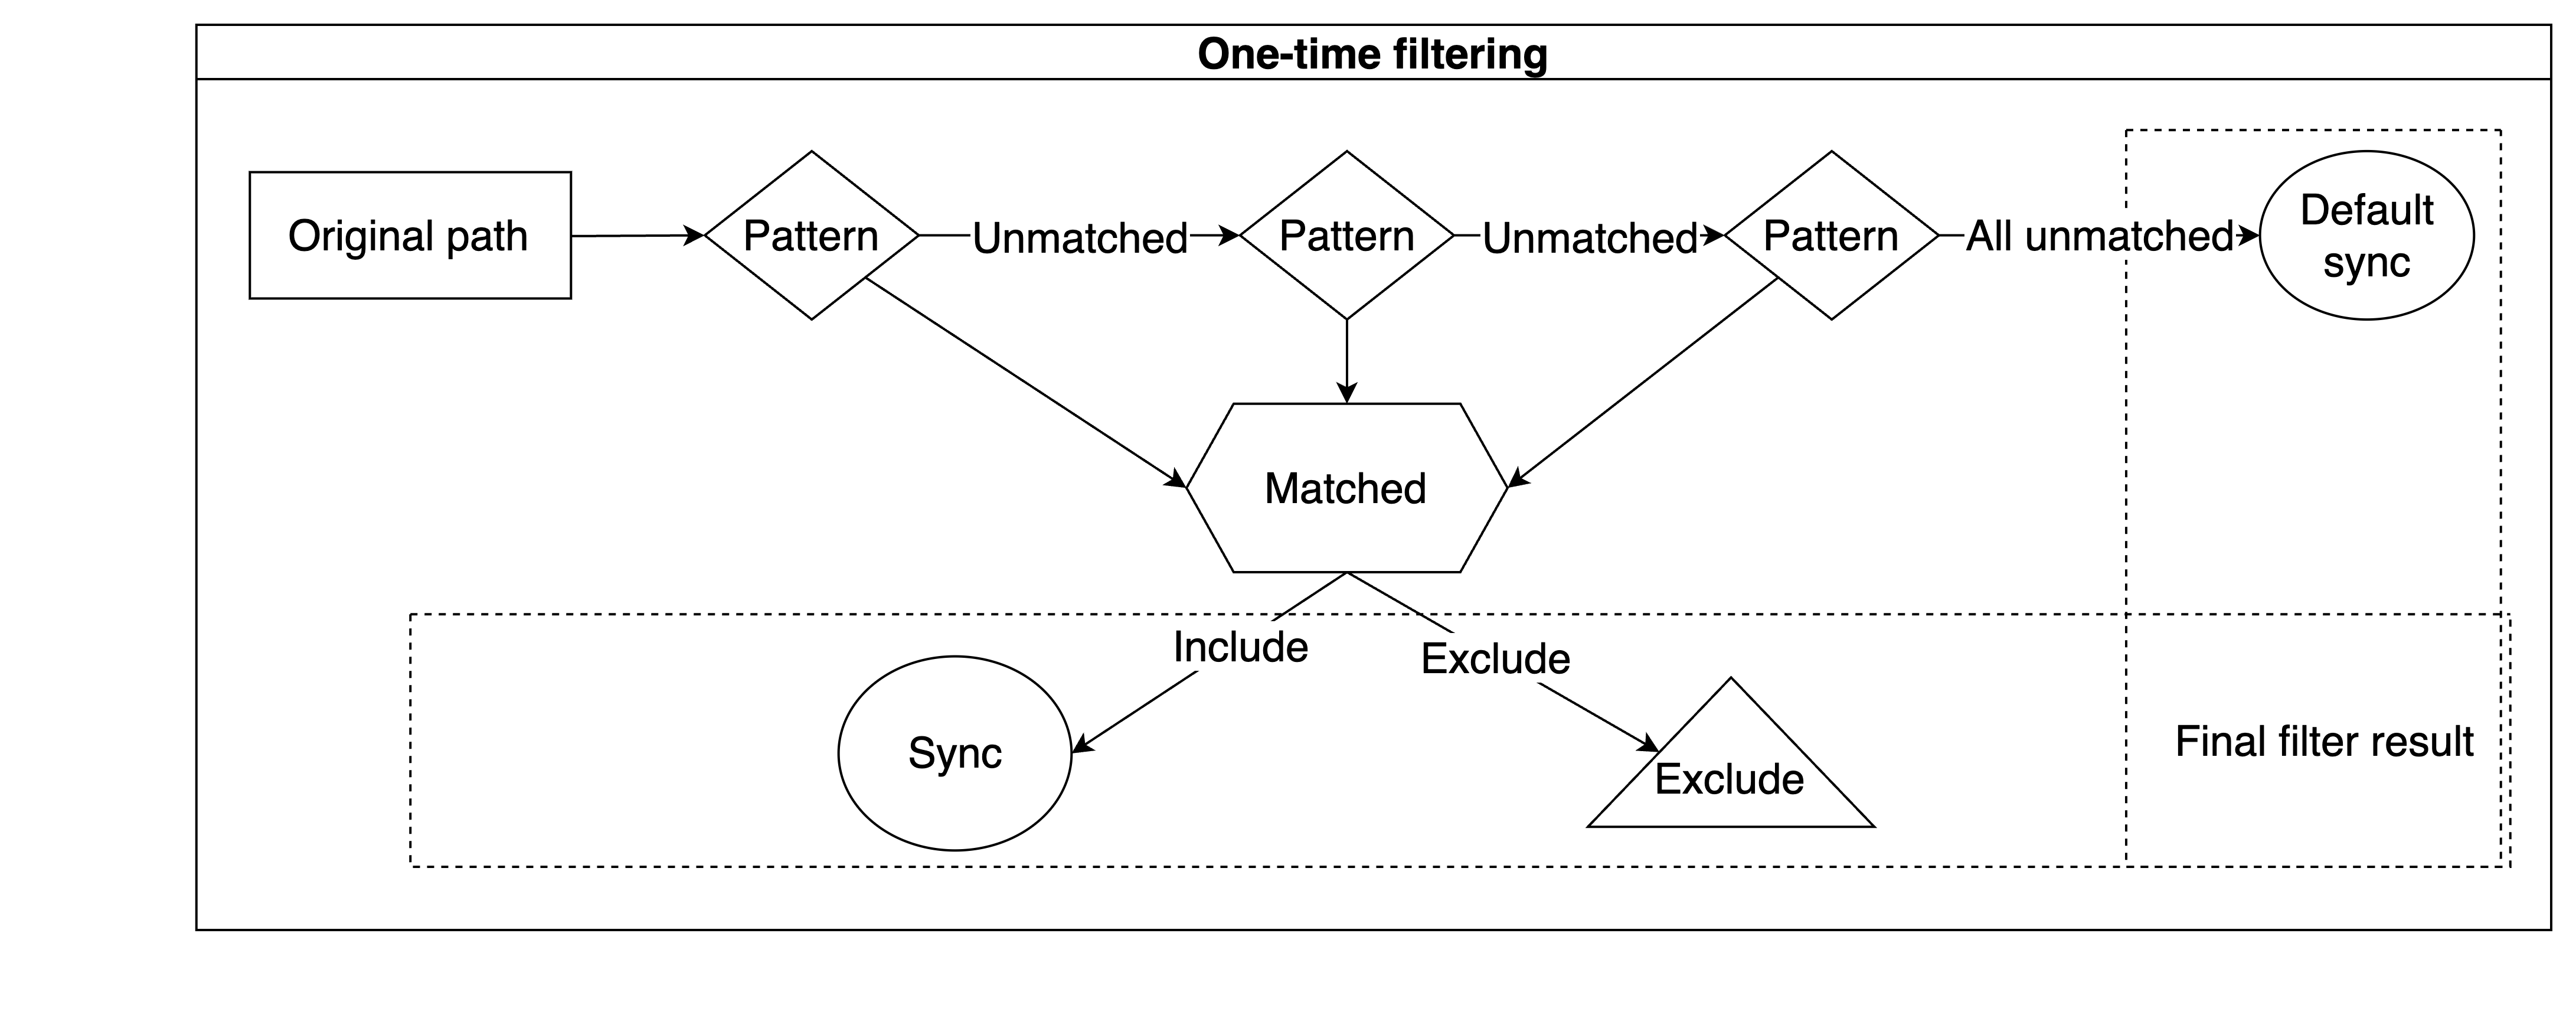 One-time filtering